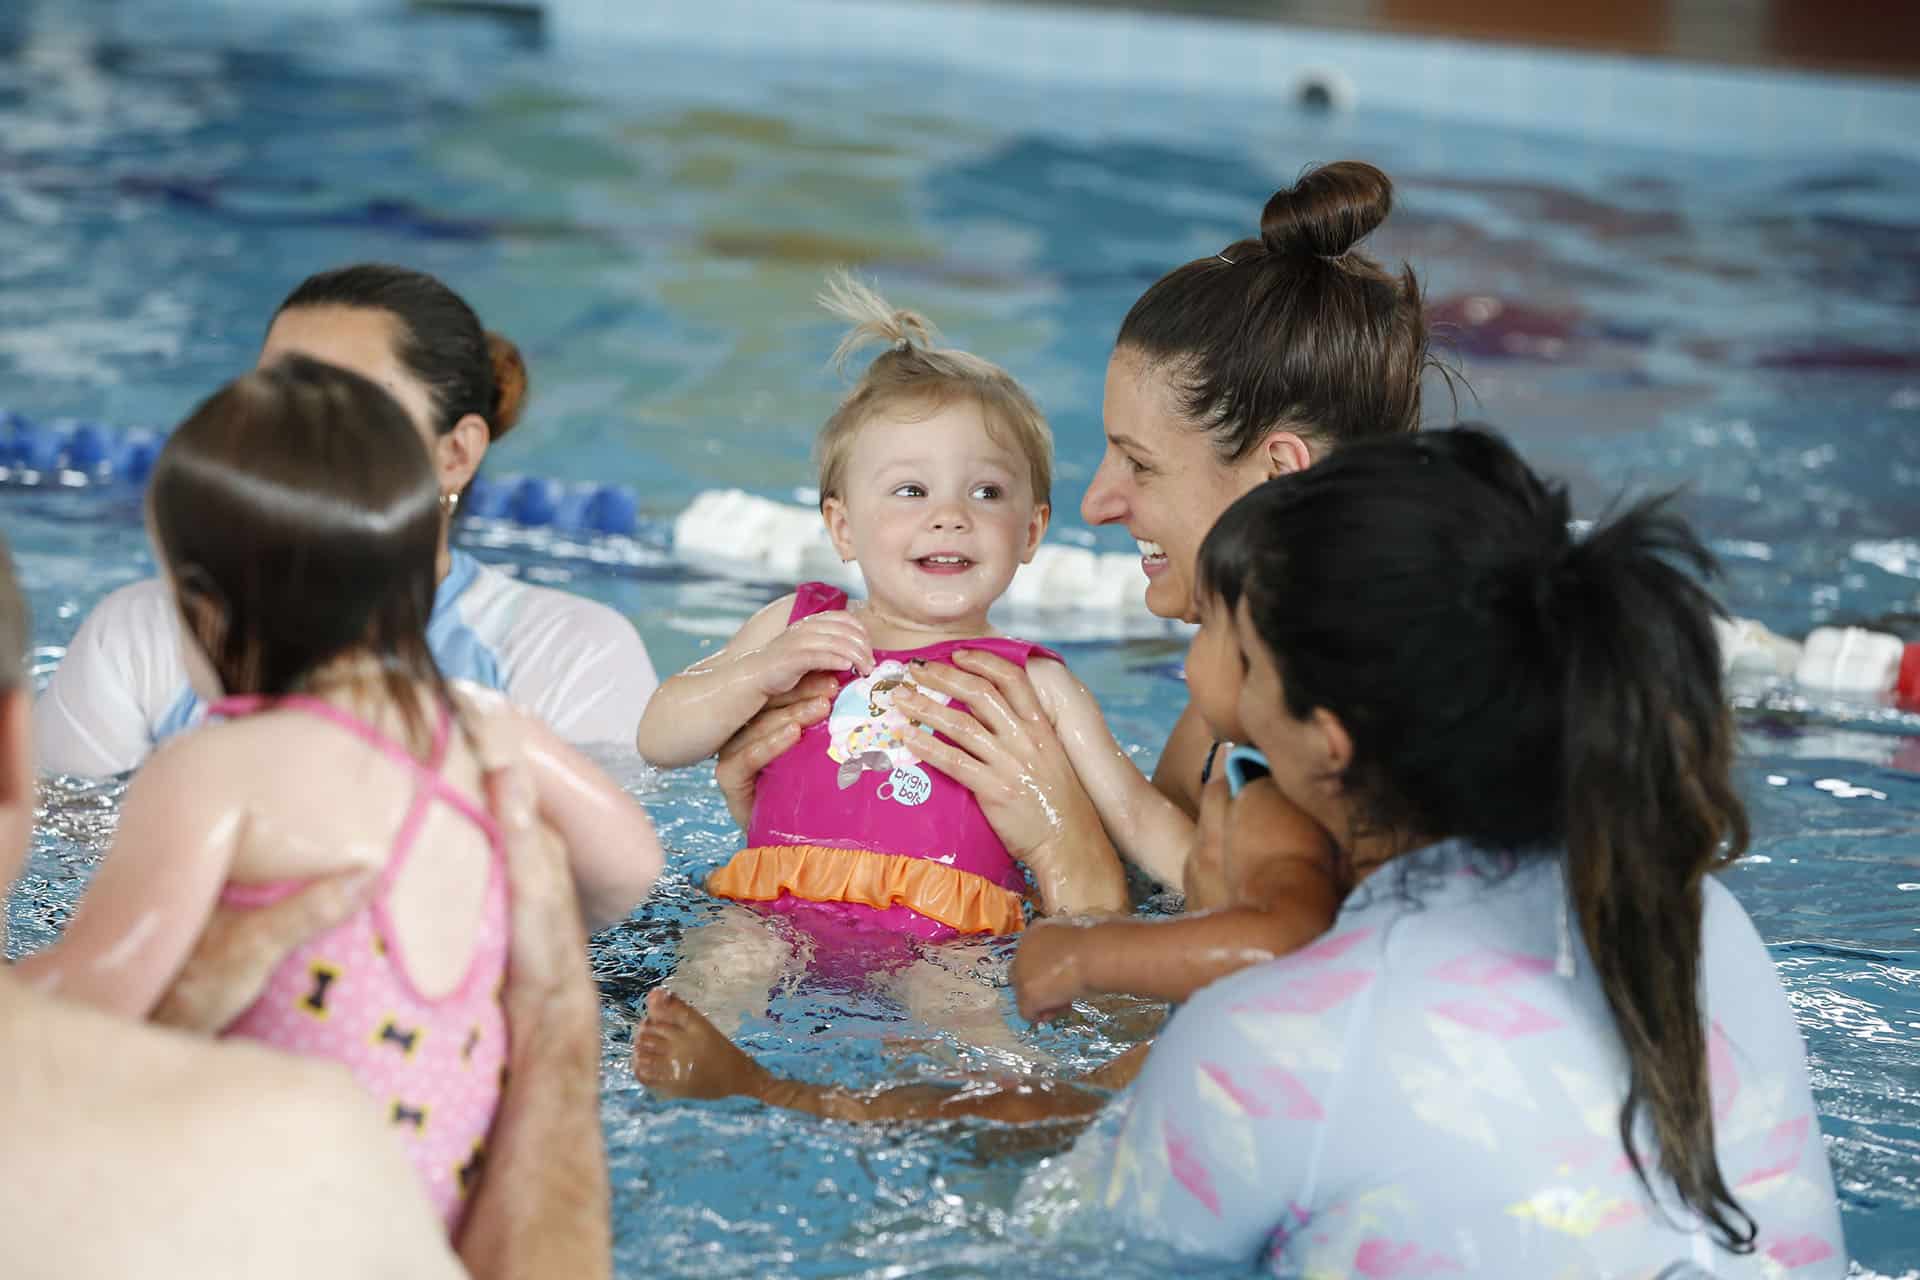 Baby Swim Lessons Happening In A Pool With Mother And Baby Daughter Present